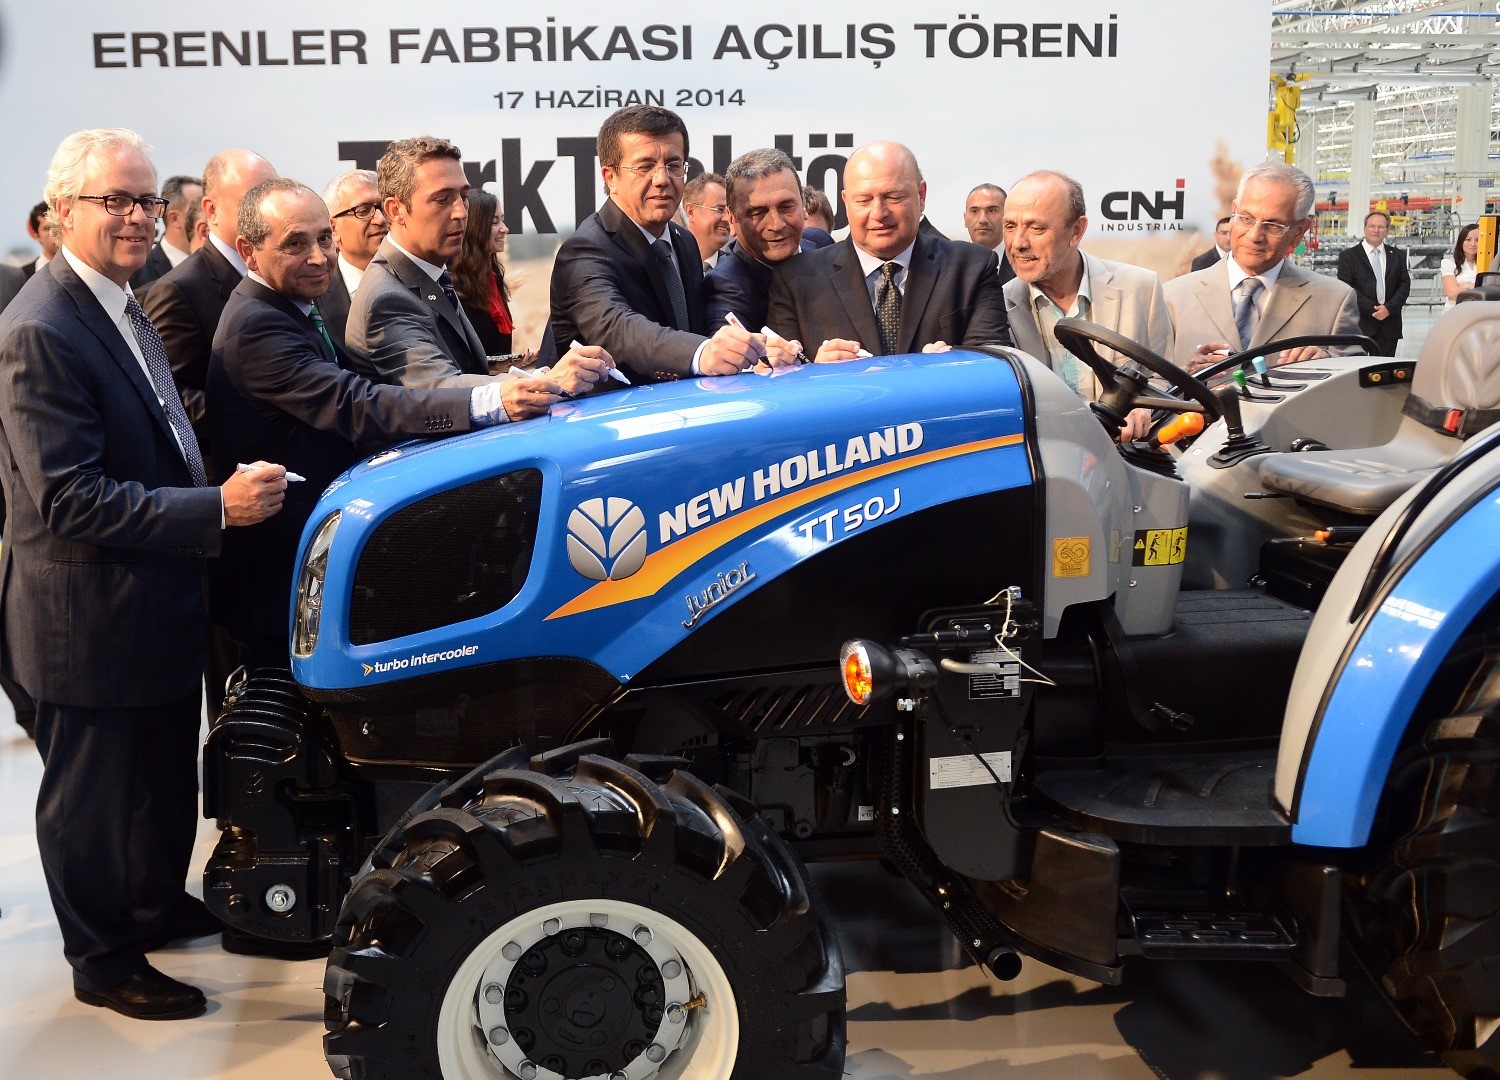 CNH Industrial CEO Richard Tobin (far left) and Chairman of the Board of Koç Holding, Mustafa V. Koç (third from right)